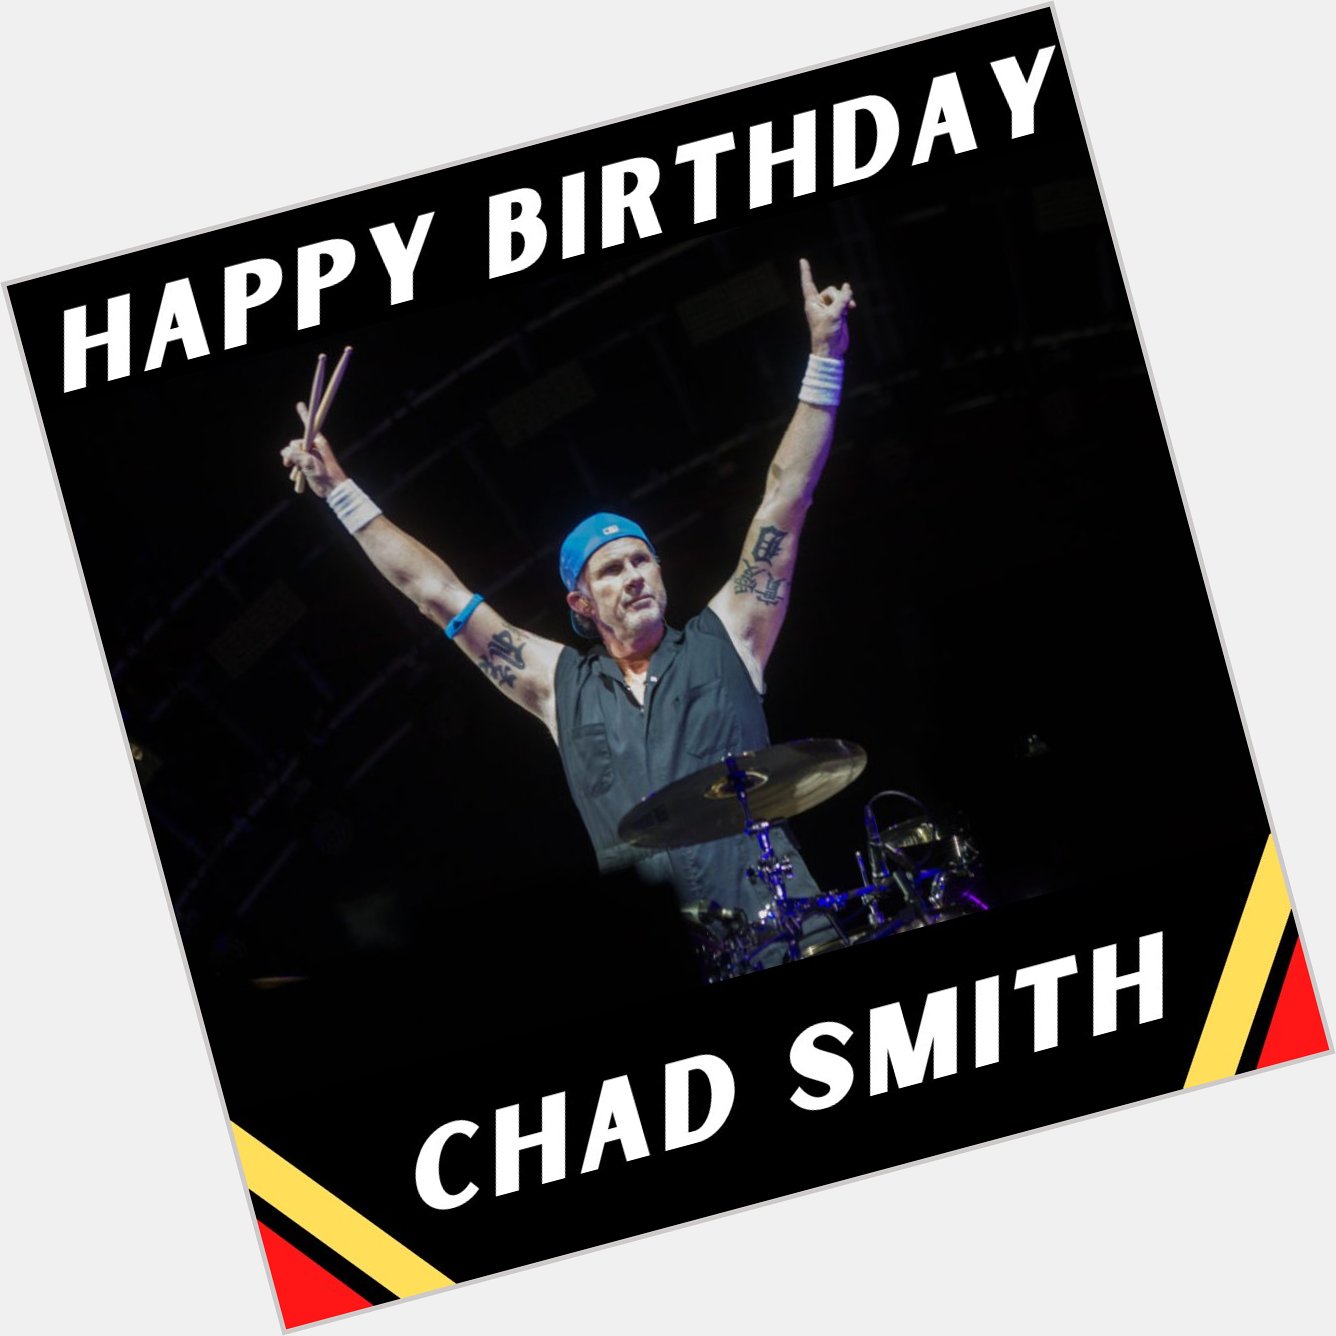 Wishing a happy birthday to Red Hot Chili Peppers legend Chad Smith   Photo by Santiago Bluguermann/Getty Images 